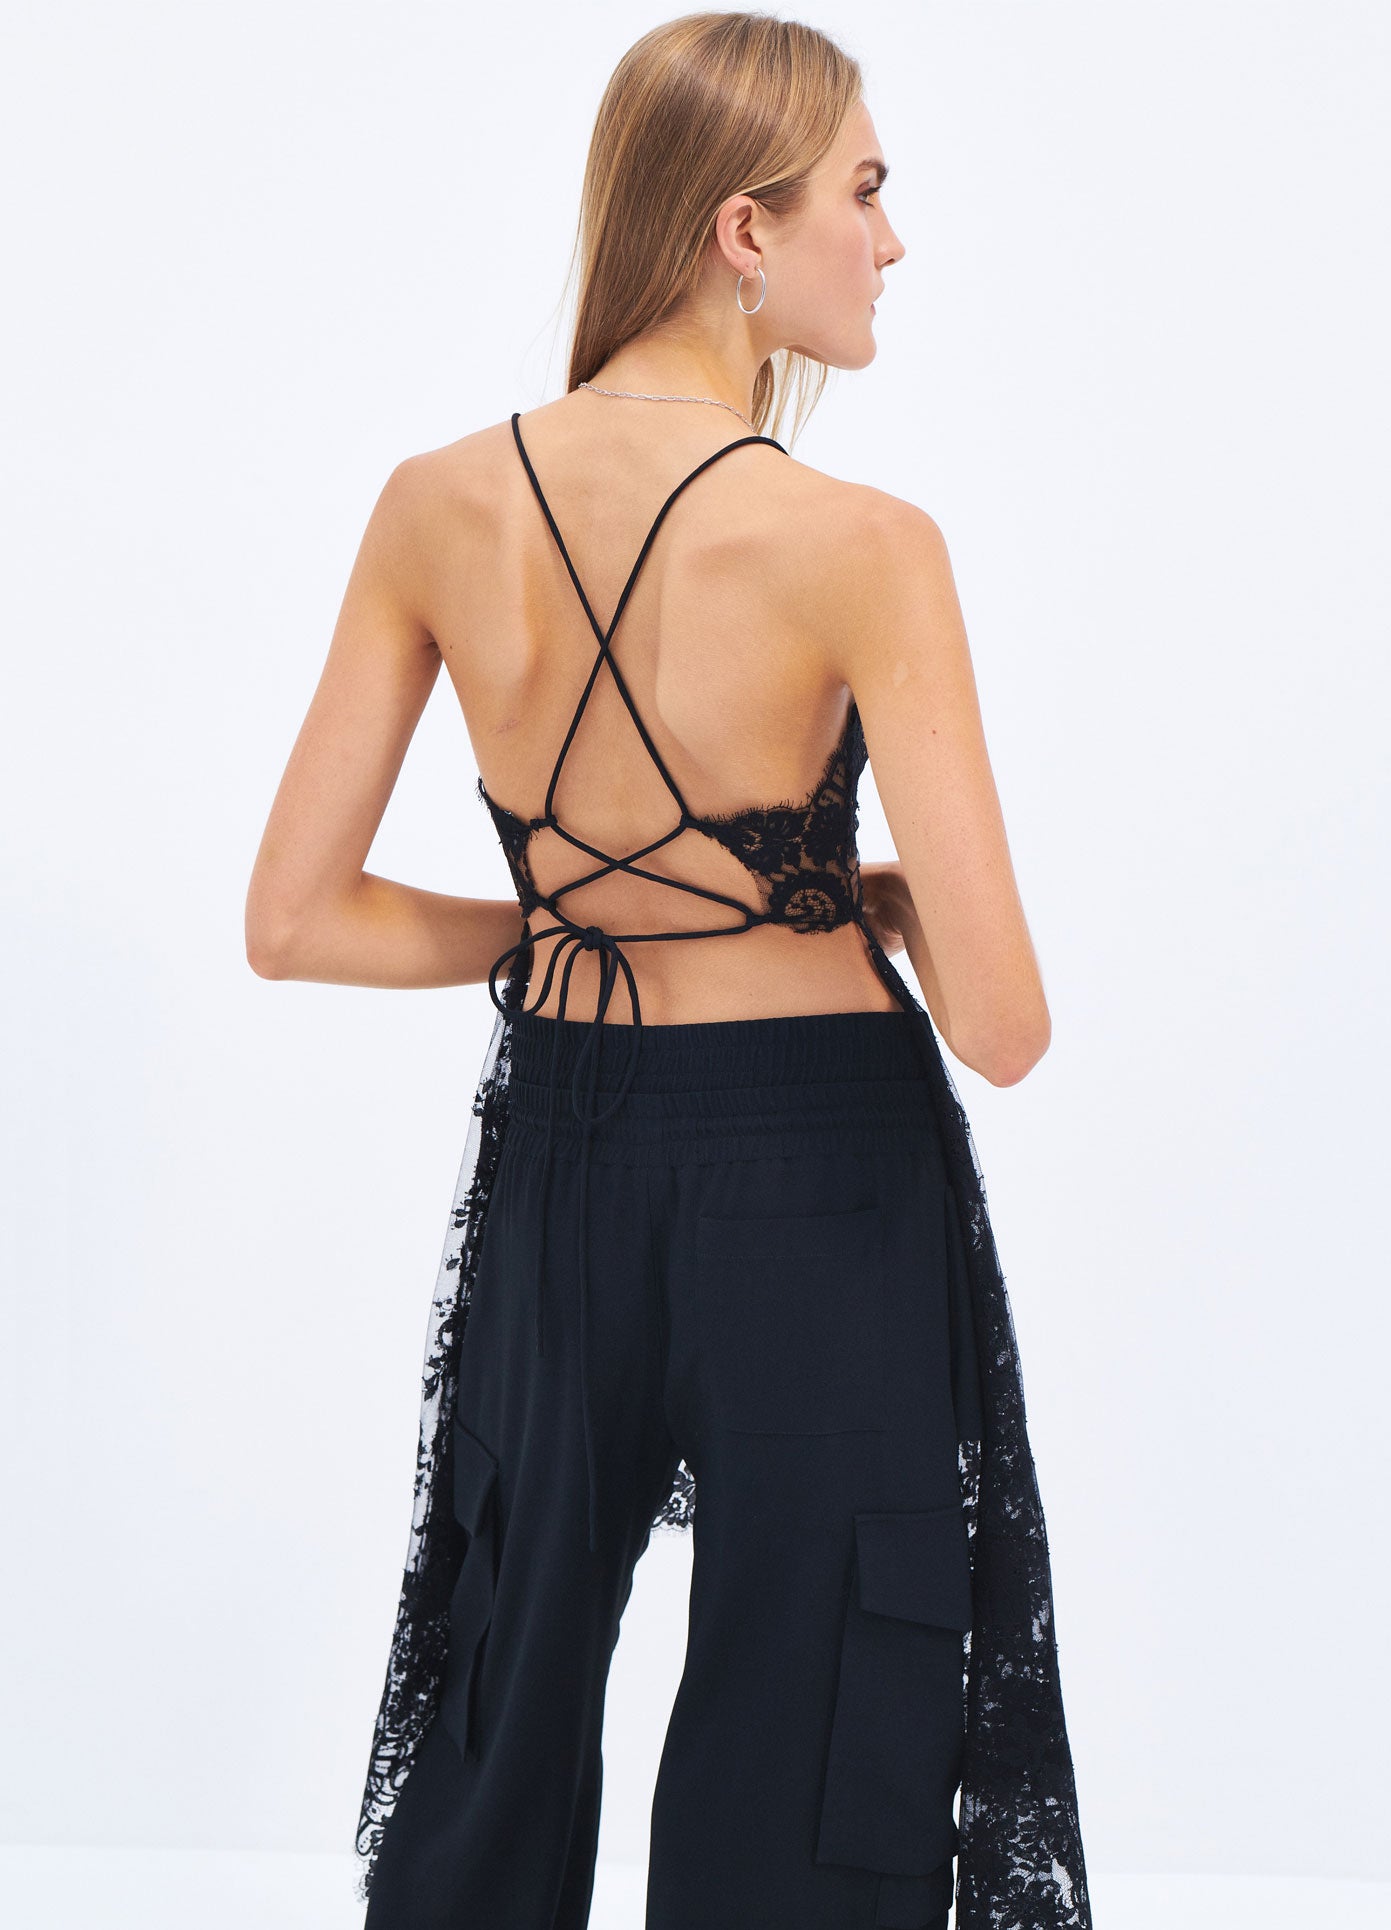 MONSE Spring 2024 Tie Back Lace Top in Black on model back view